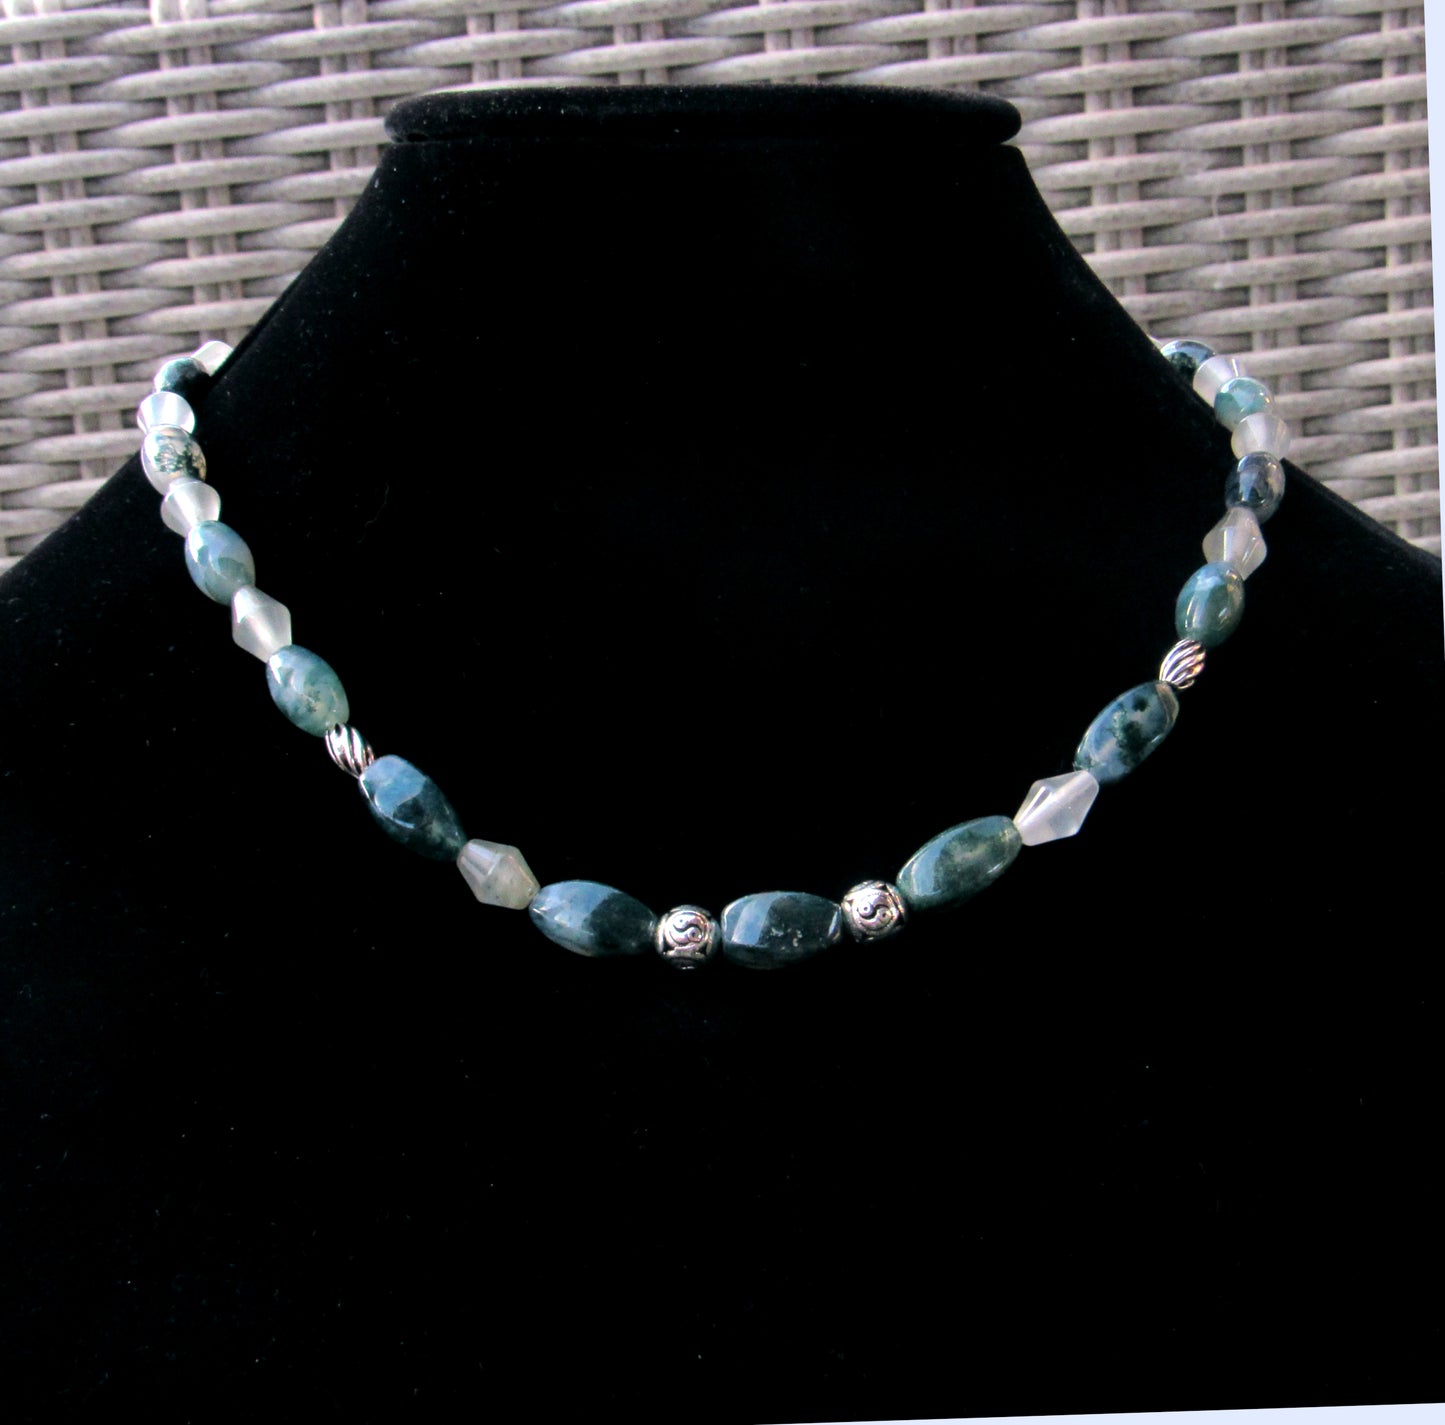 Moss Agate, Green Rutile Quartz gemstones, and Sterling Silver Yin Yang Necklace